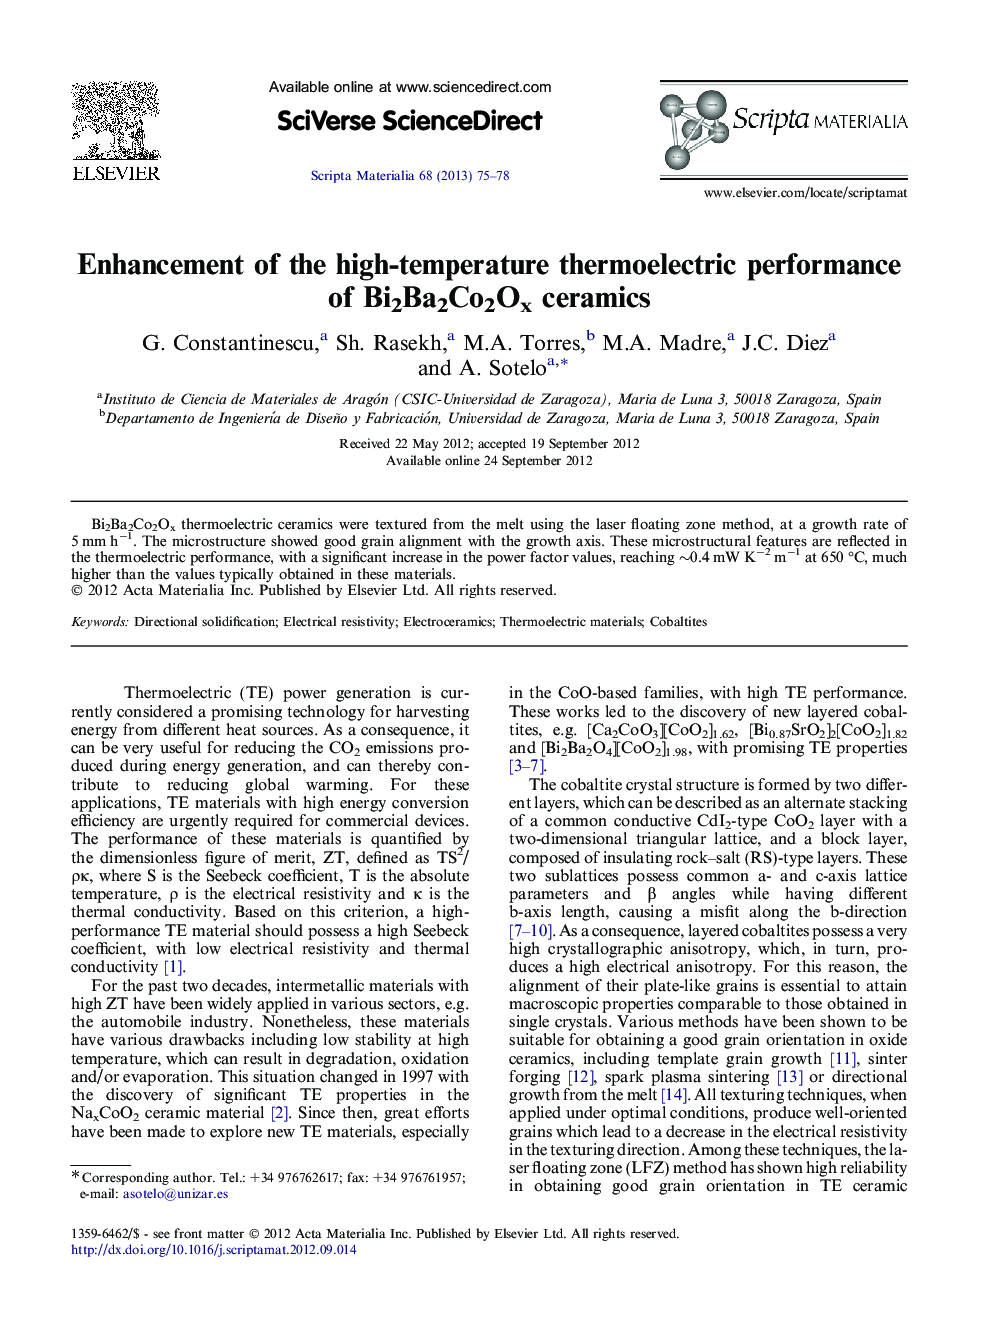 Enhancement of the high-temperature thermoelectric performance of Bi2Ba2Co2Ox ceramics